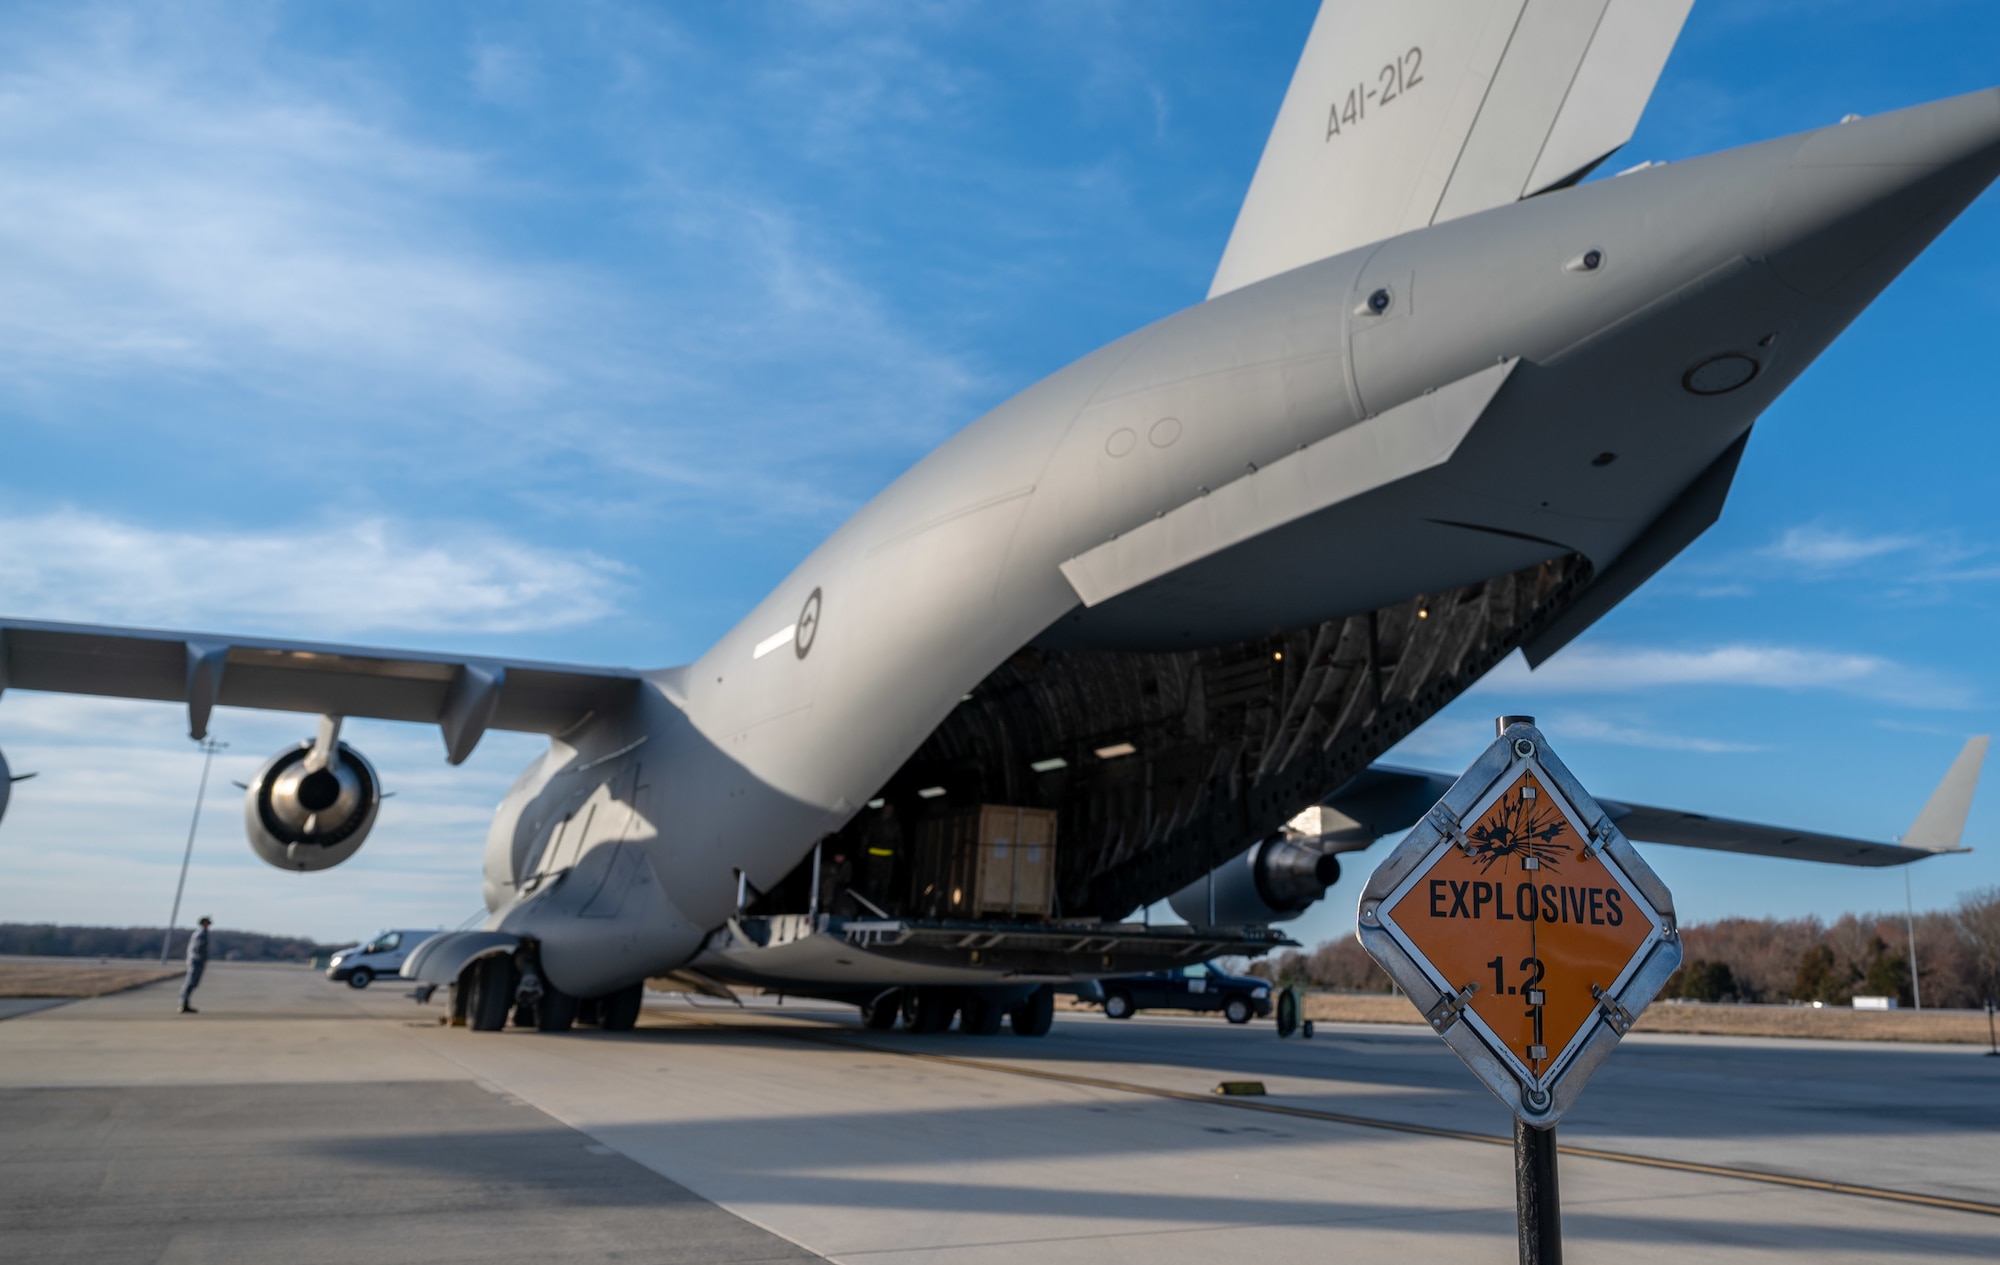 A Royal Australian Air Force C-17 Globemaster III prepares to be loaded with cargo at Dover Air Force Base, Delaware, March 13, 2021. The U.S. and Australia maintain a robust relationship underpinned by shared democratic values, common interests and cultural bonds. The U.S.–Australia alliance is an anchor for peace and stability in the Indo-Pacific region and around the world.